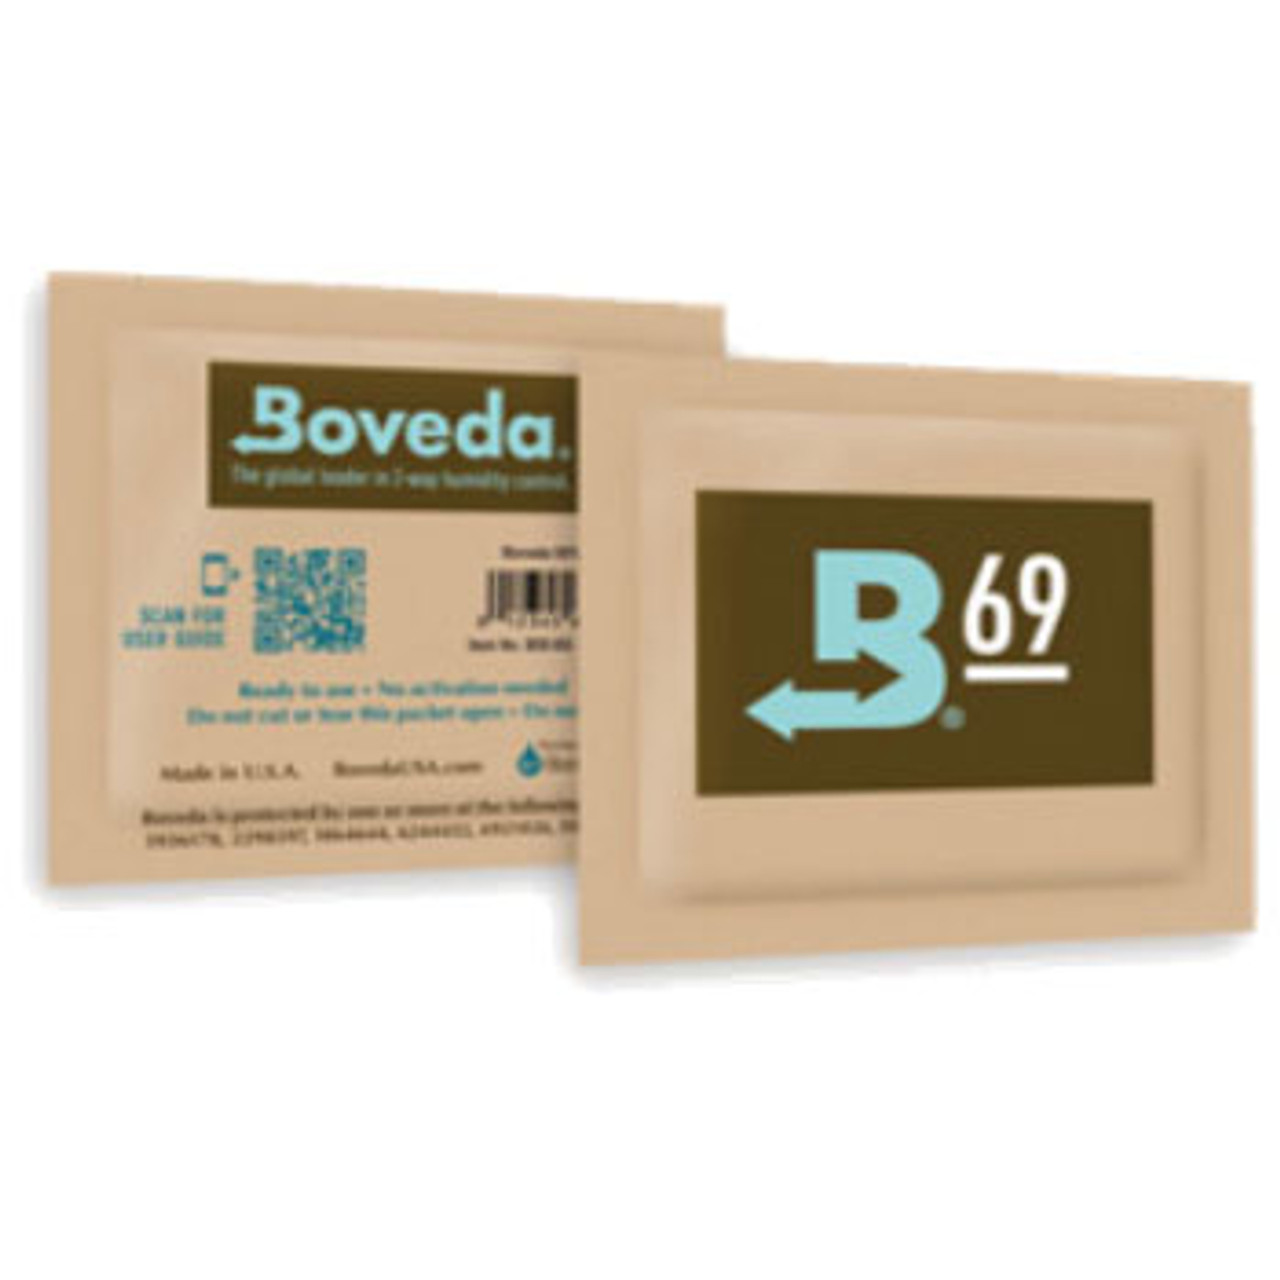 Pack of 6 Humidification Packets for Cigars 69 % Boveda